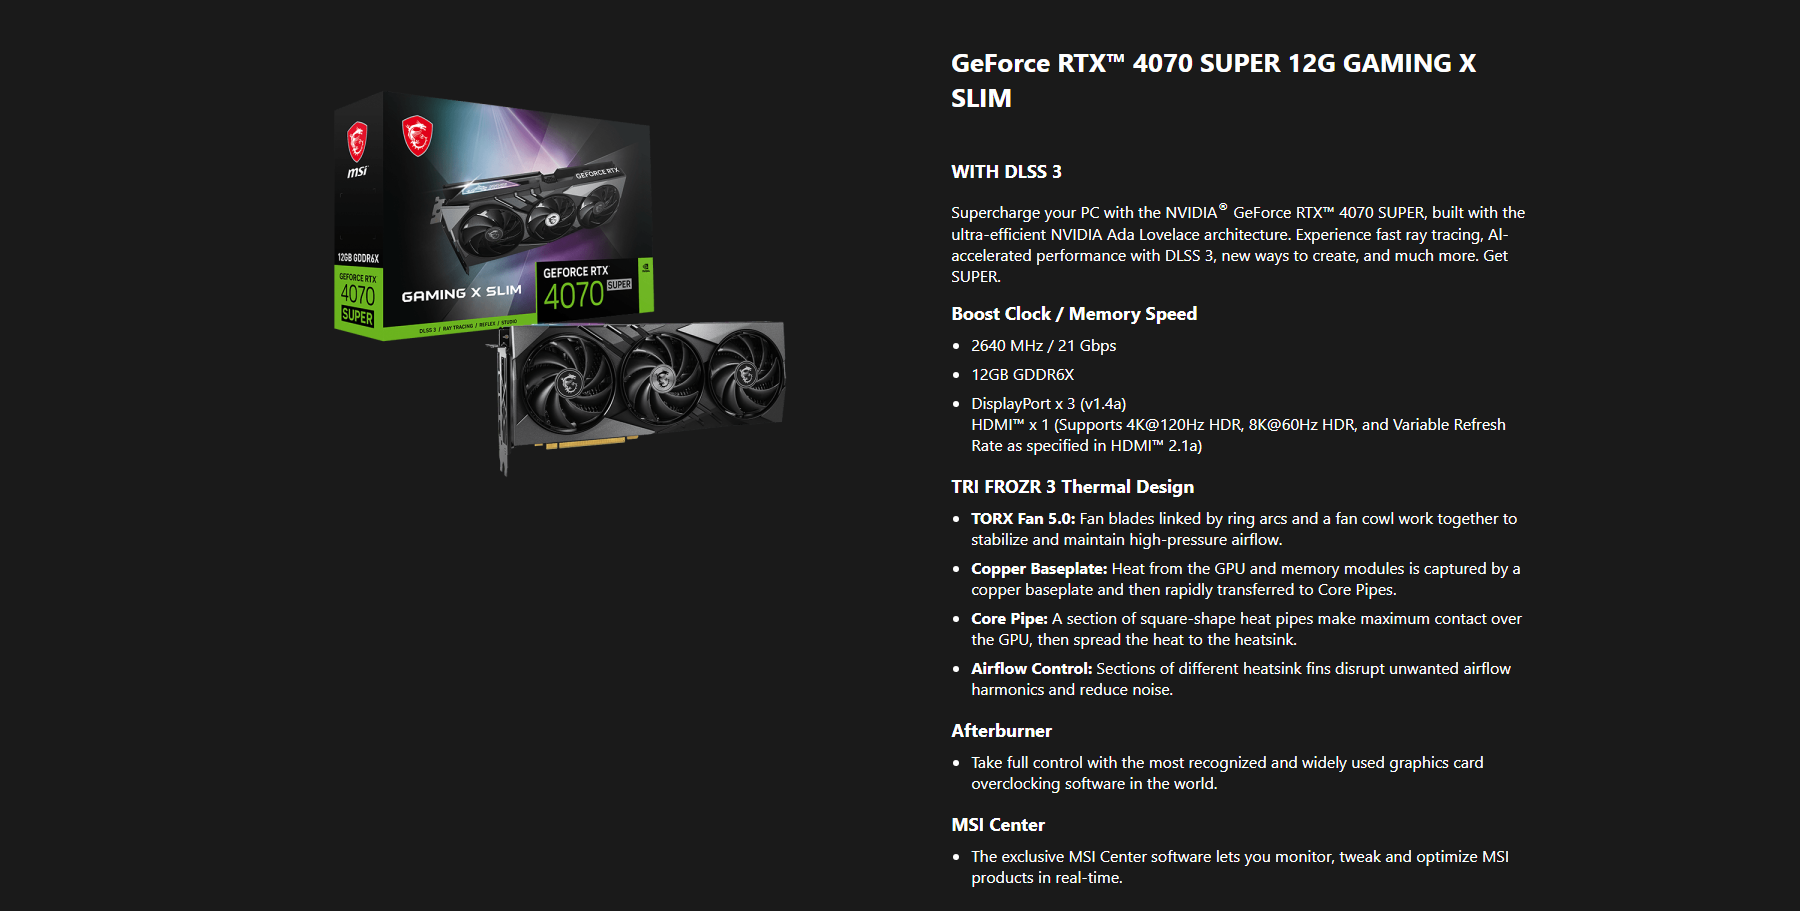 A large marketing image providing additional information about the product MSI GeForce RTX 4070 SUPER Gaming X Slim 12GB GDDR6X - Black - Additional alt info not provided